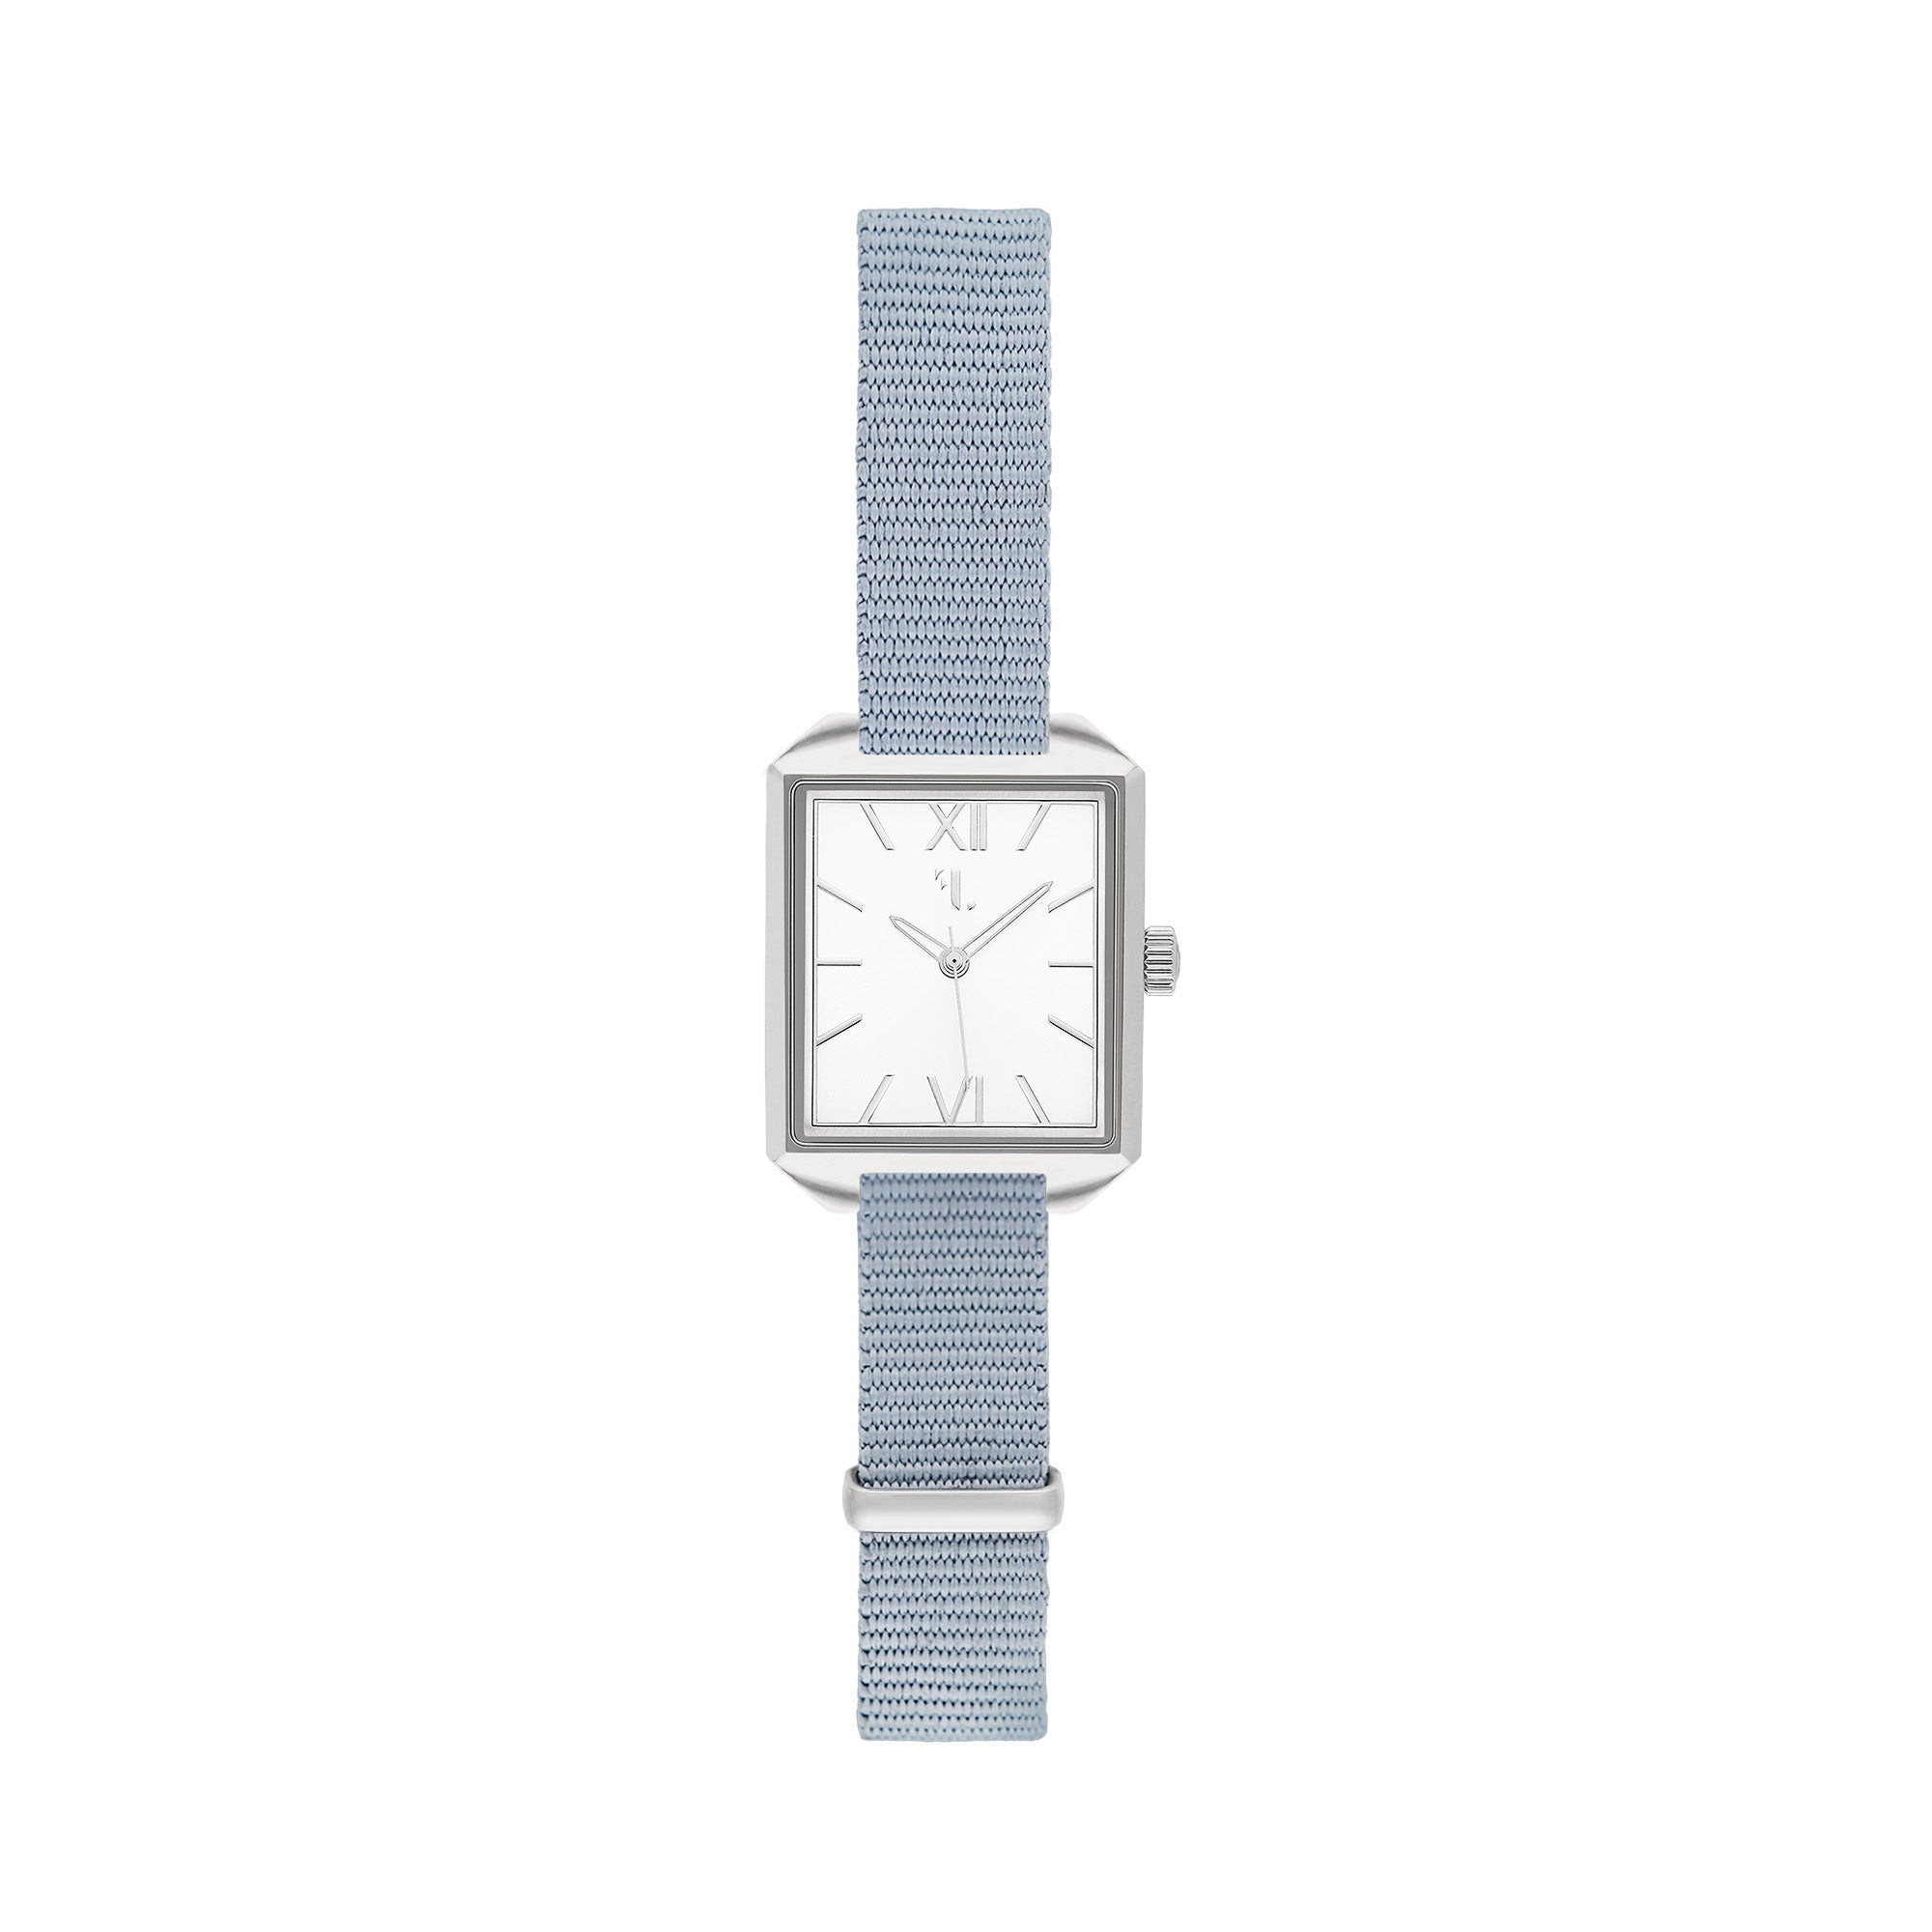 Ixelles watch by Five Jwlry, featuring a small square silver dial with matching silver case, handle, and baby blue nato bracelet. Designed in Montreal, it offers quartz movement, 5ATM water resistance, and a 2-year warranty. Comes with an interchangeable bracelet using the easy release function